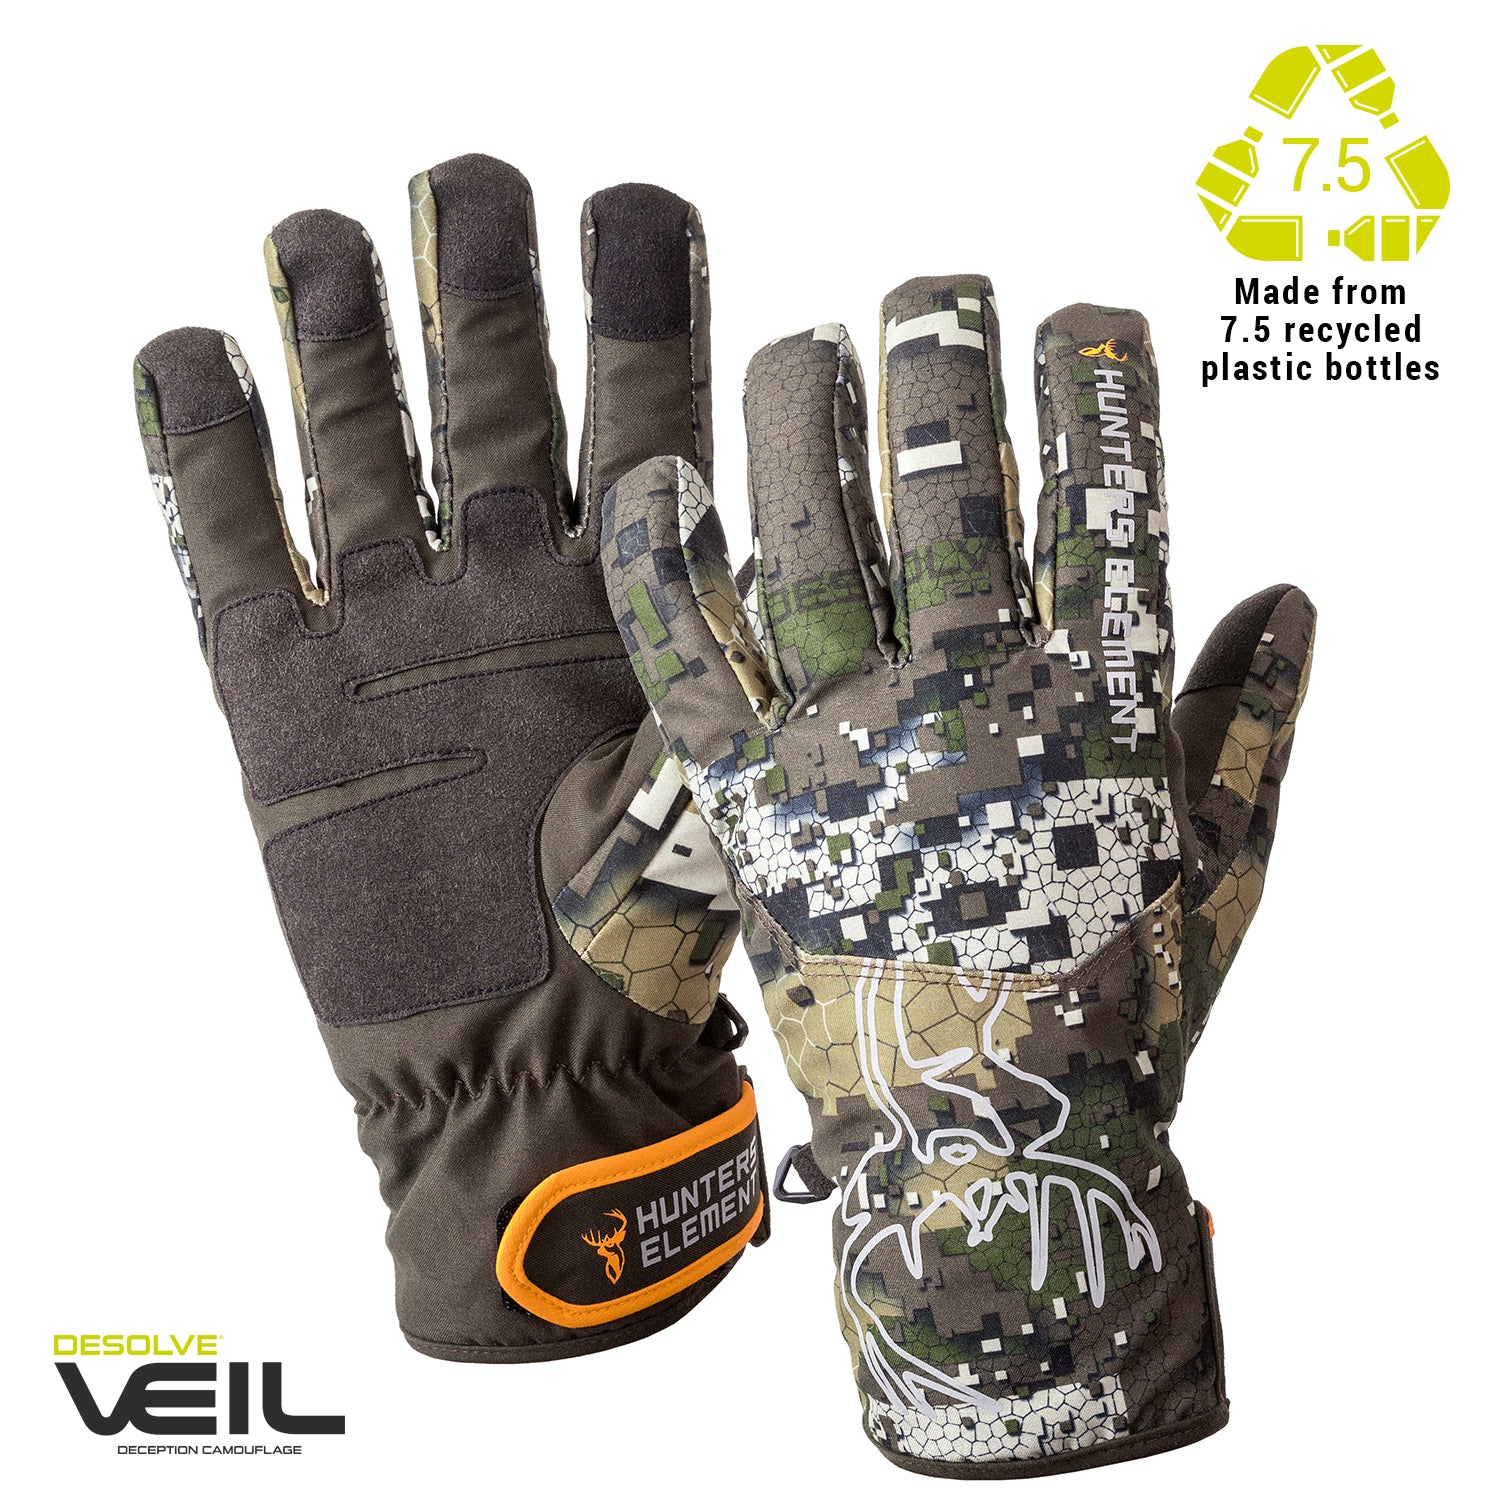 Ultimate Performance Hunting Gloves